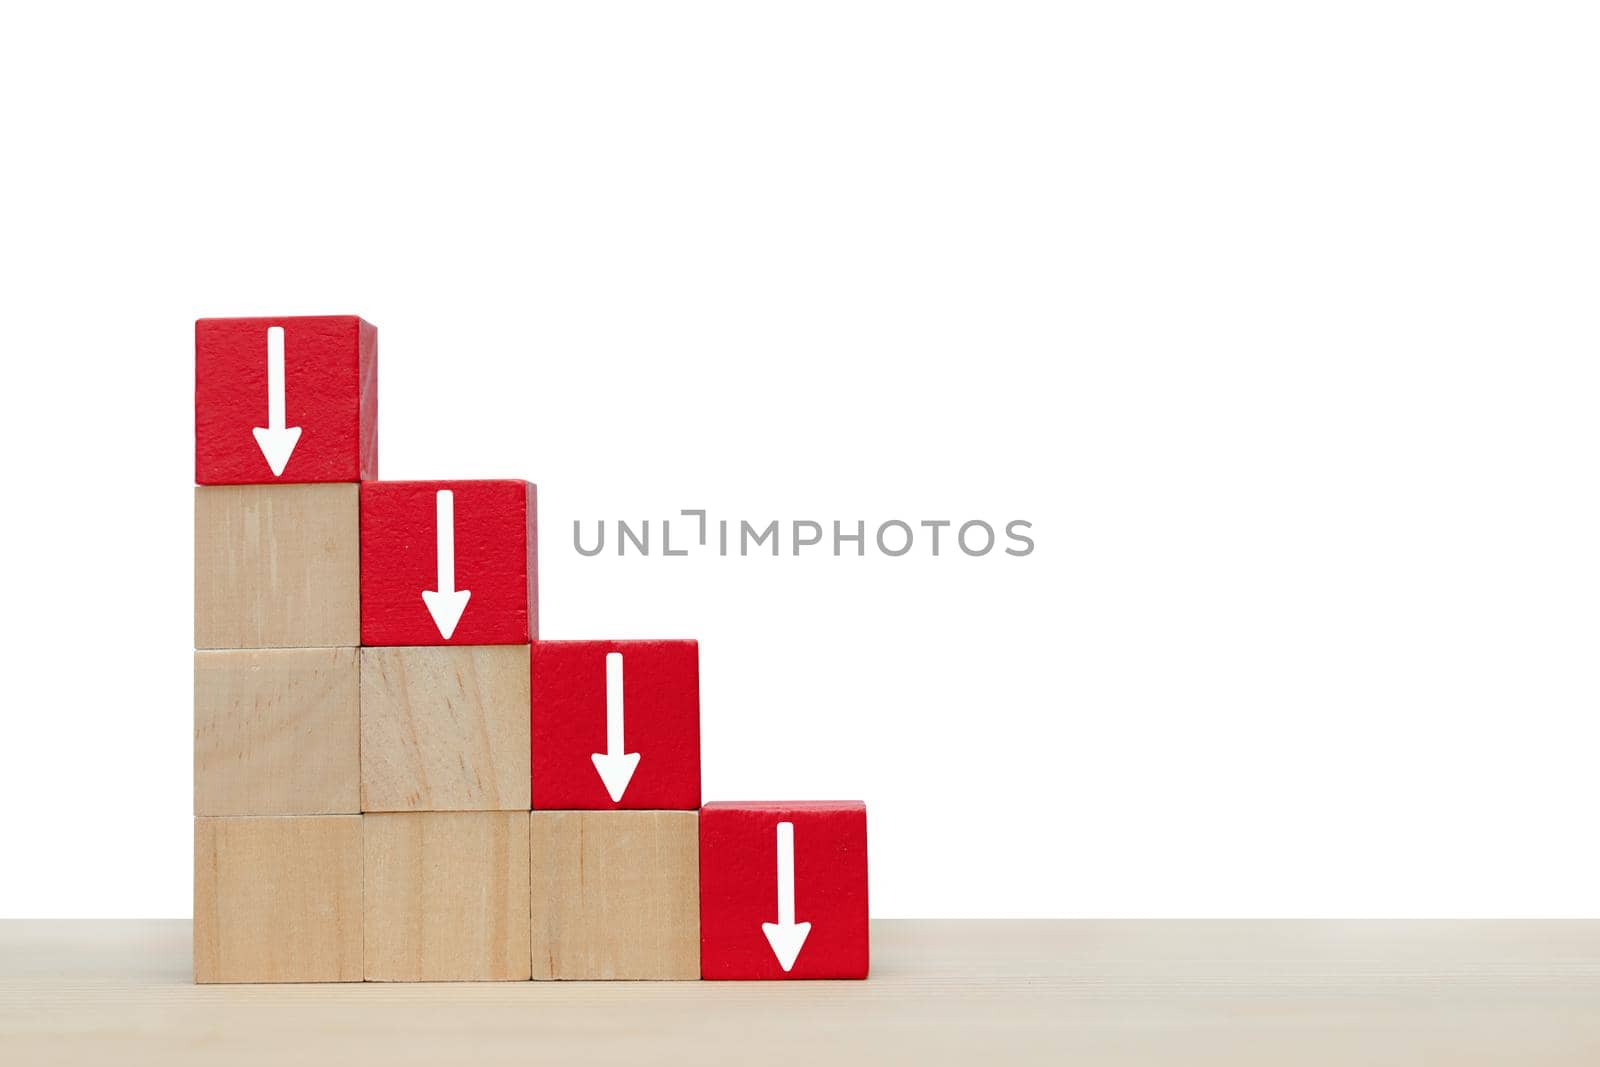 Arrow pointing down on red wooden block.  Symbol of the fall of investment or businesses by Buttus_casso